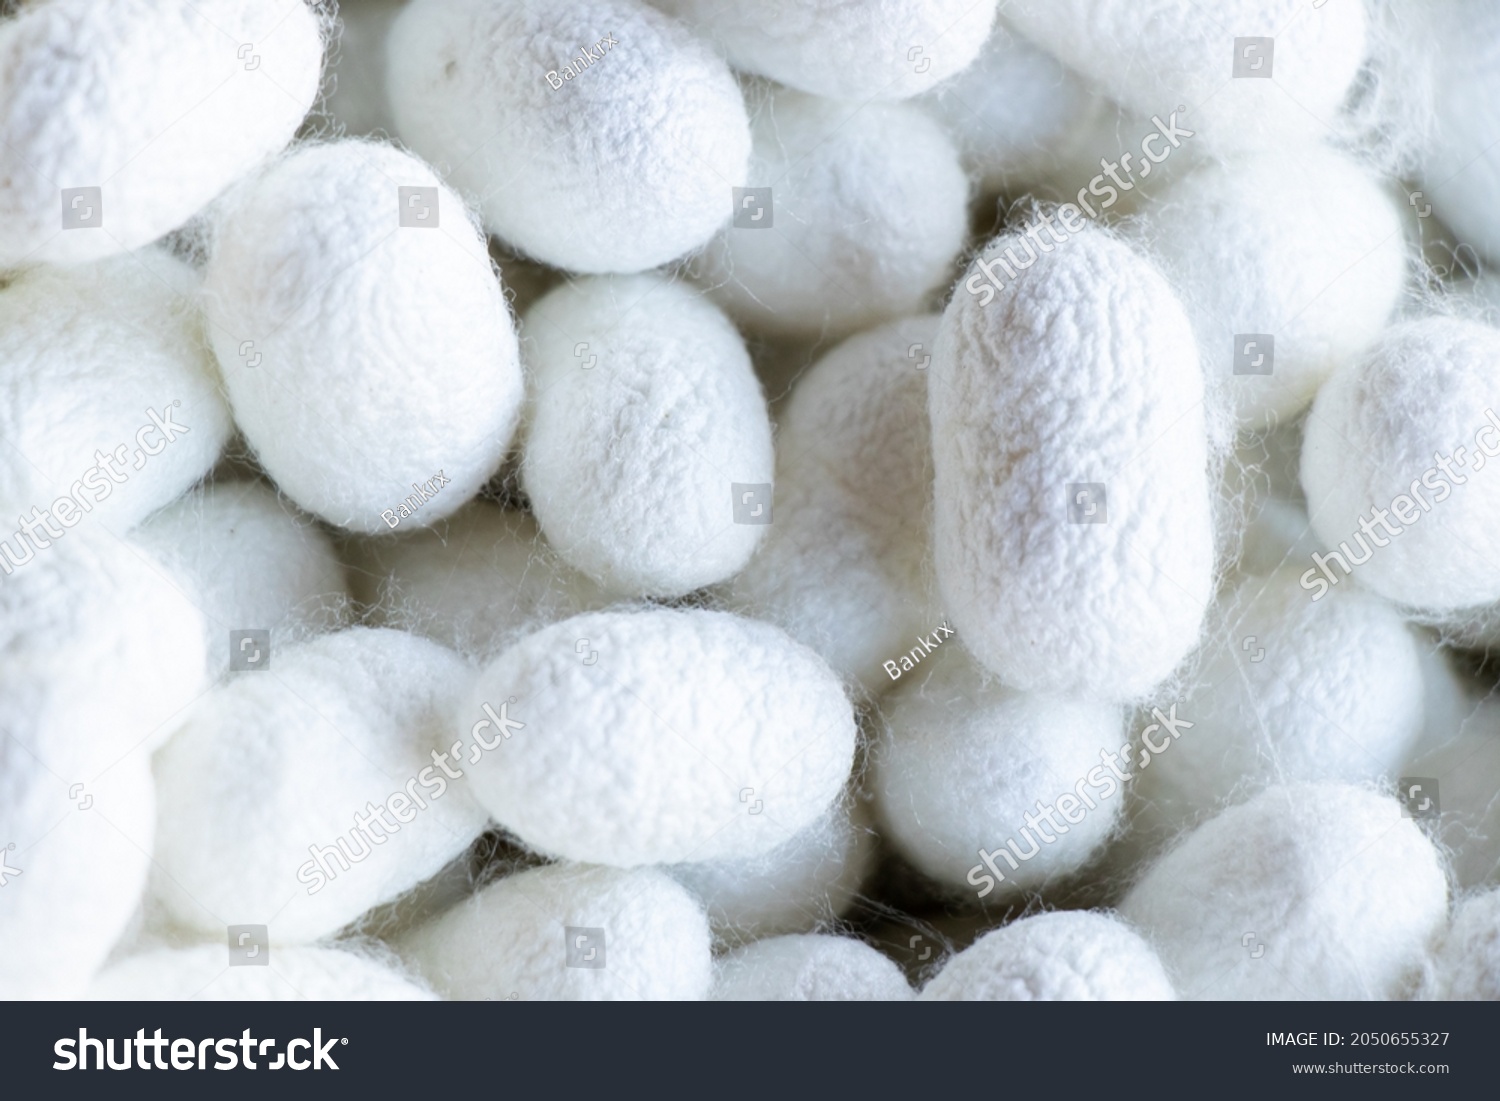 Group of silkworm in white cocoon stage background #2050655327